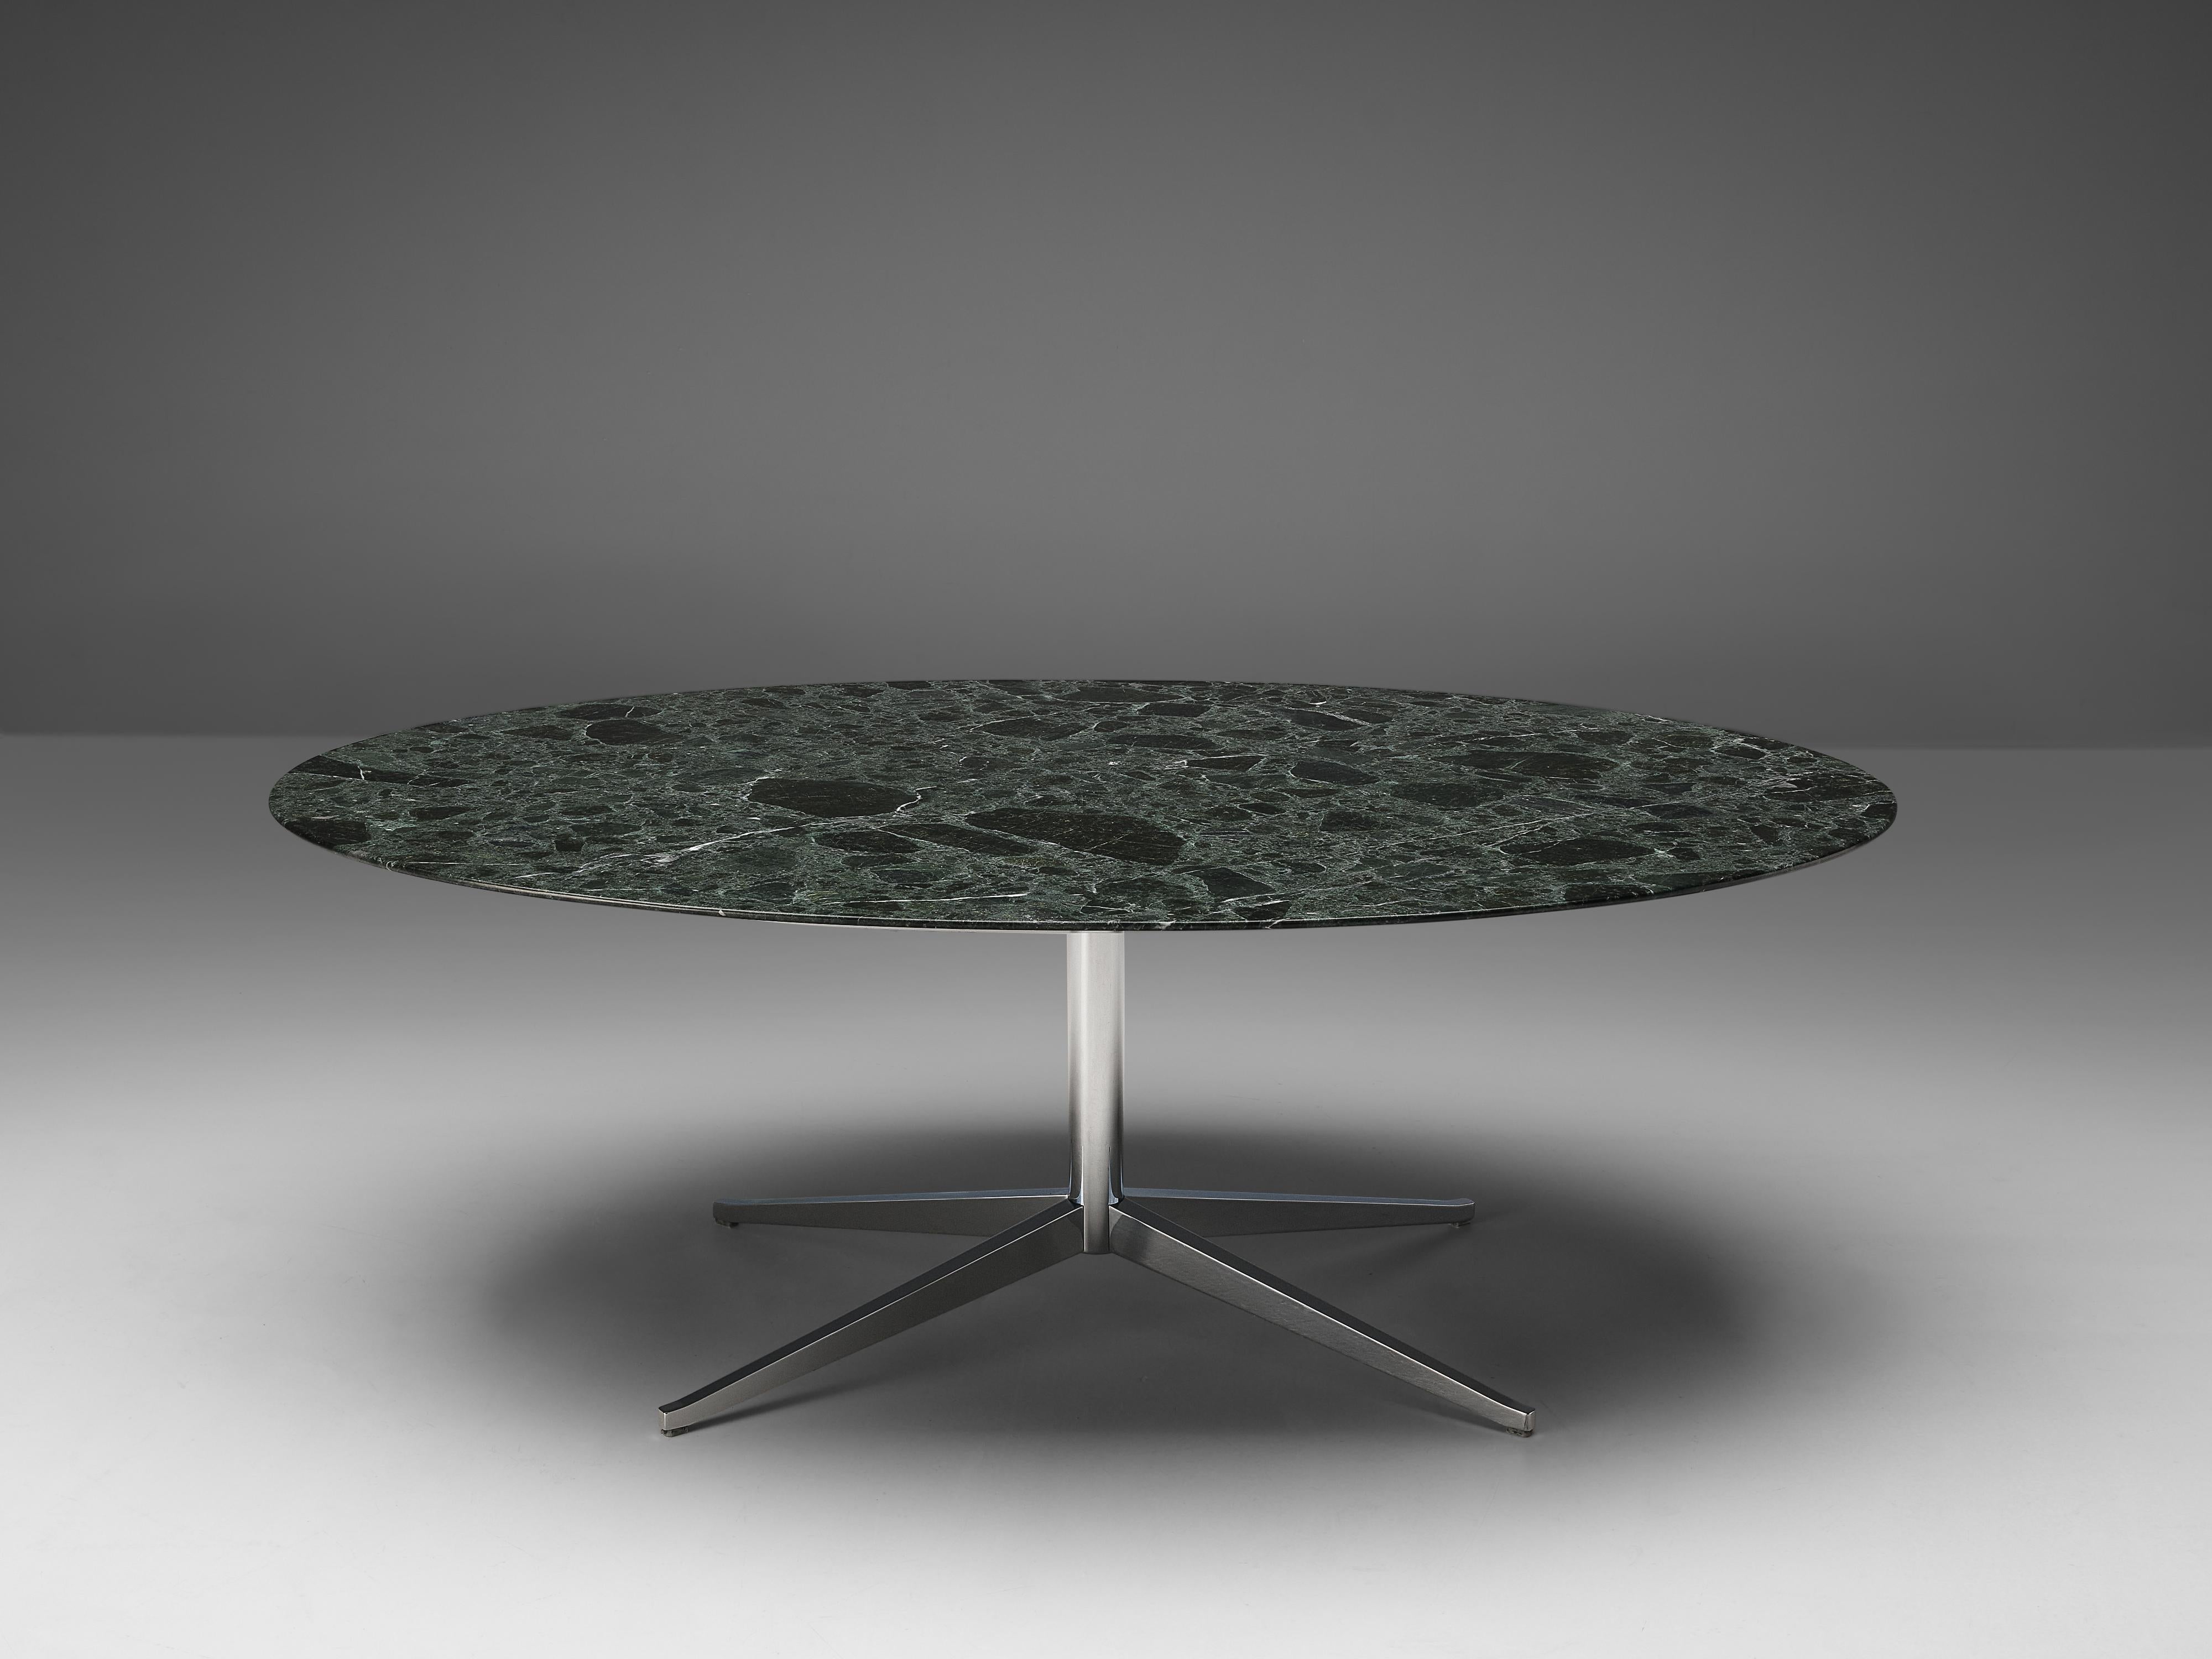 Florence Knoll for Knoll International, dining table model 78, marble, metal, United States, design 1961

Florence Knoll designed this table that can function as a desk as well as a dining table features an oval top in beautiful green marble. The